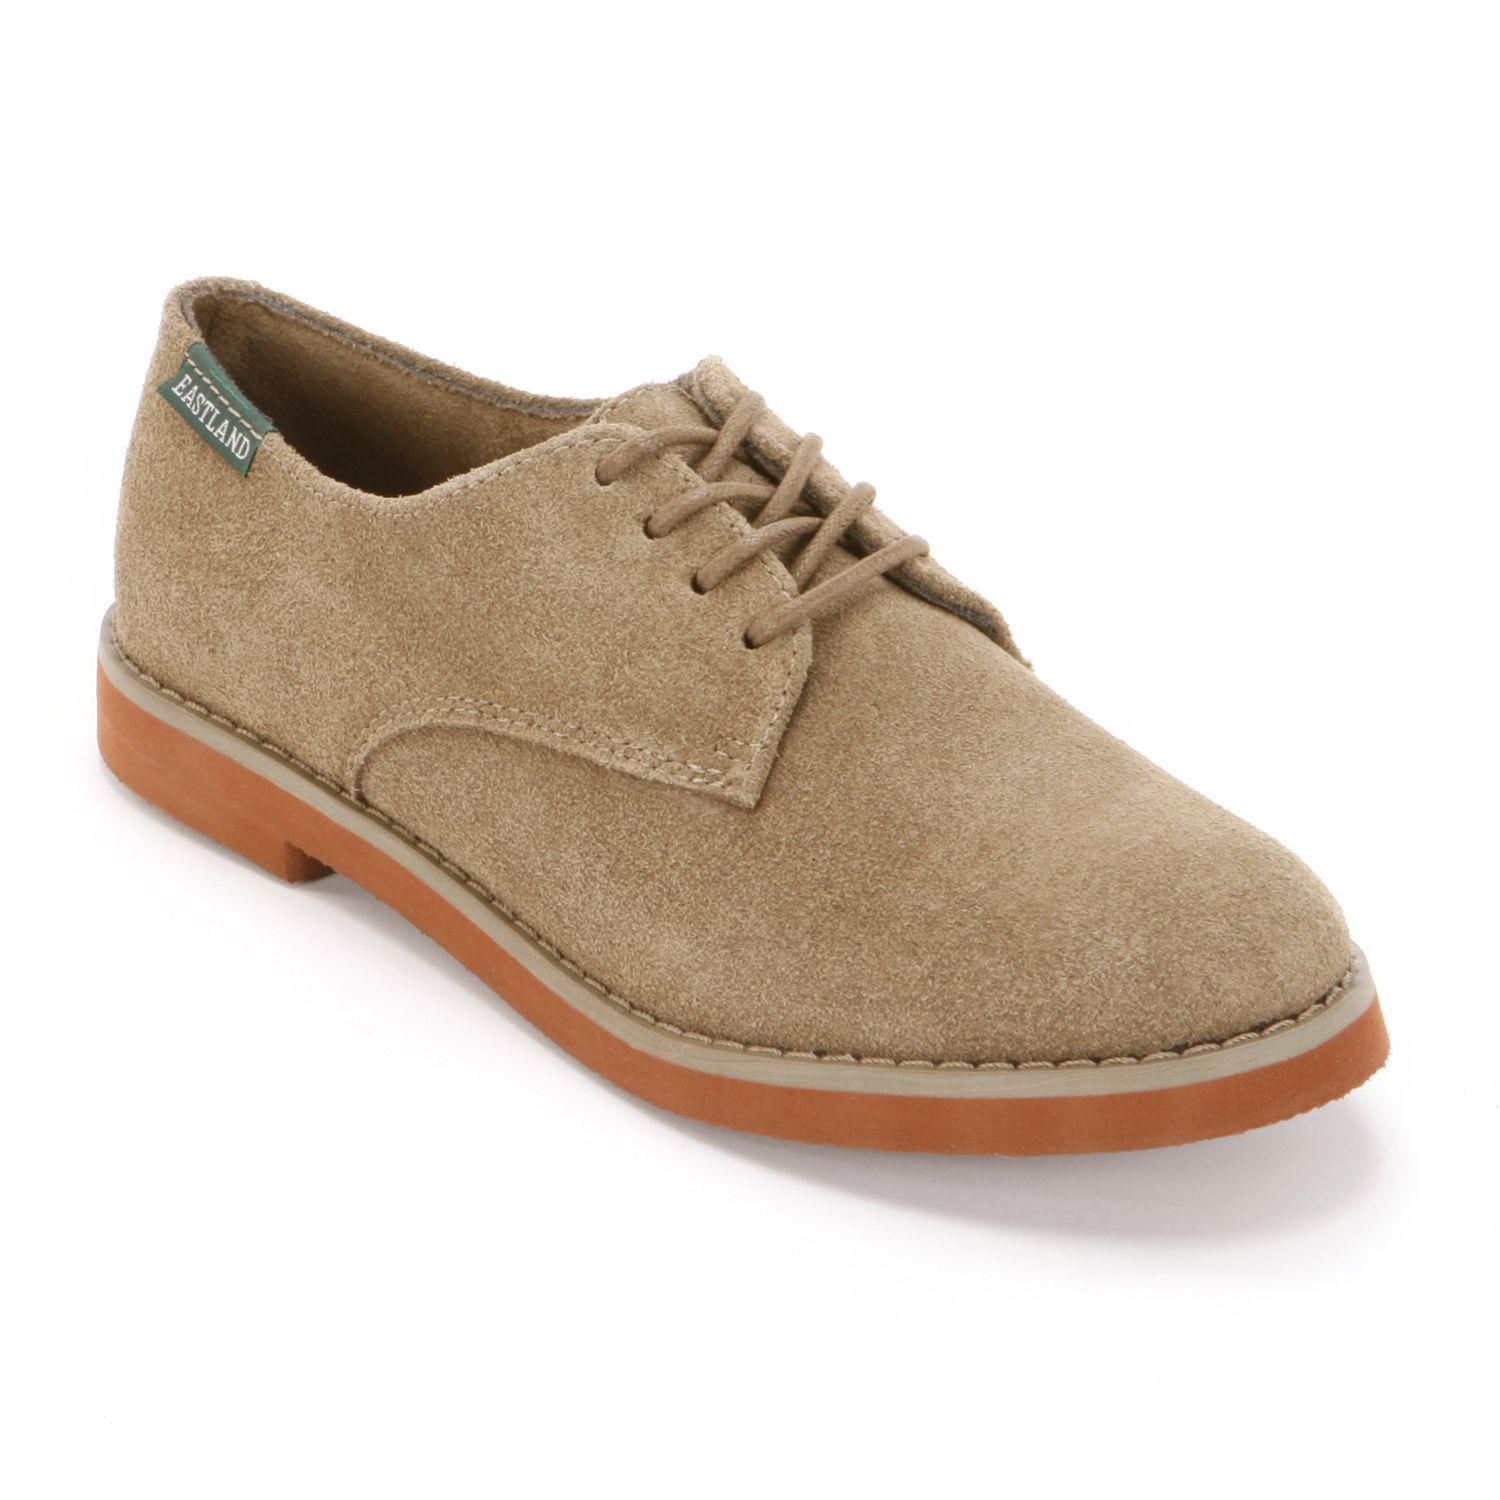 Image for Eastland Bucksport Women's Suede Oxford Shoes at Kohl's.